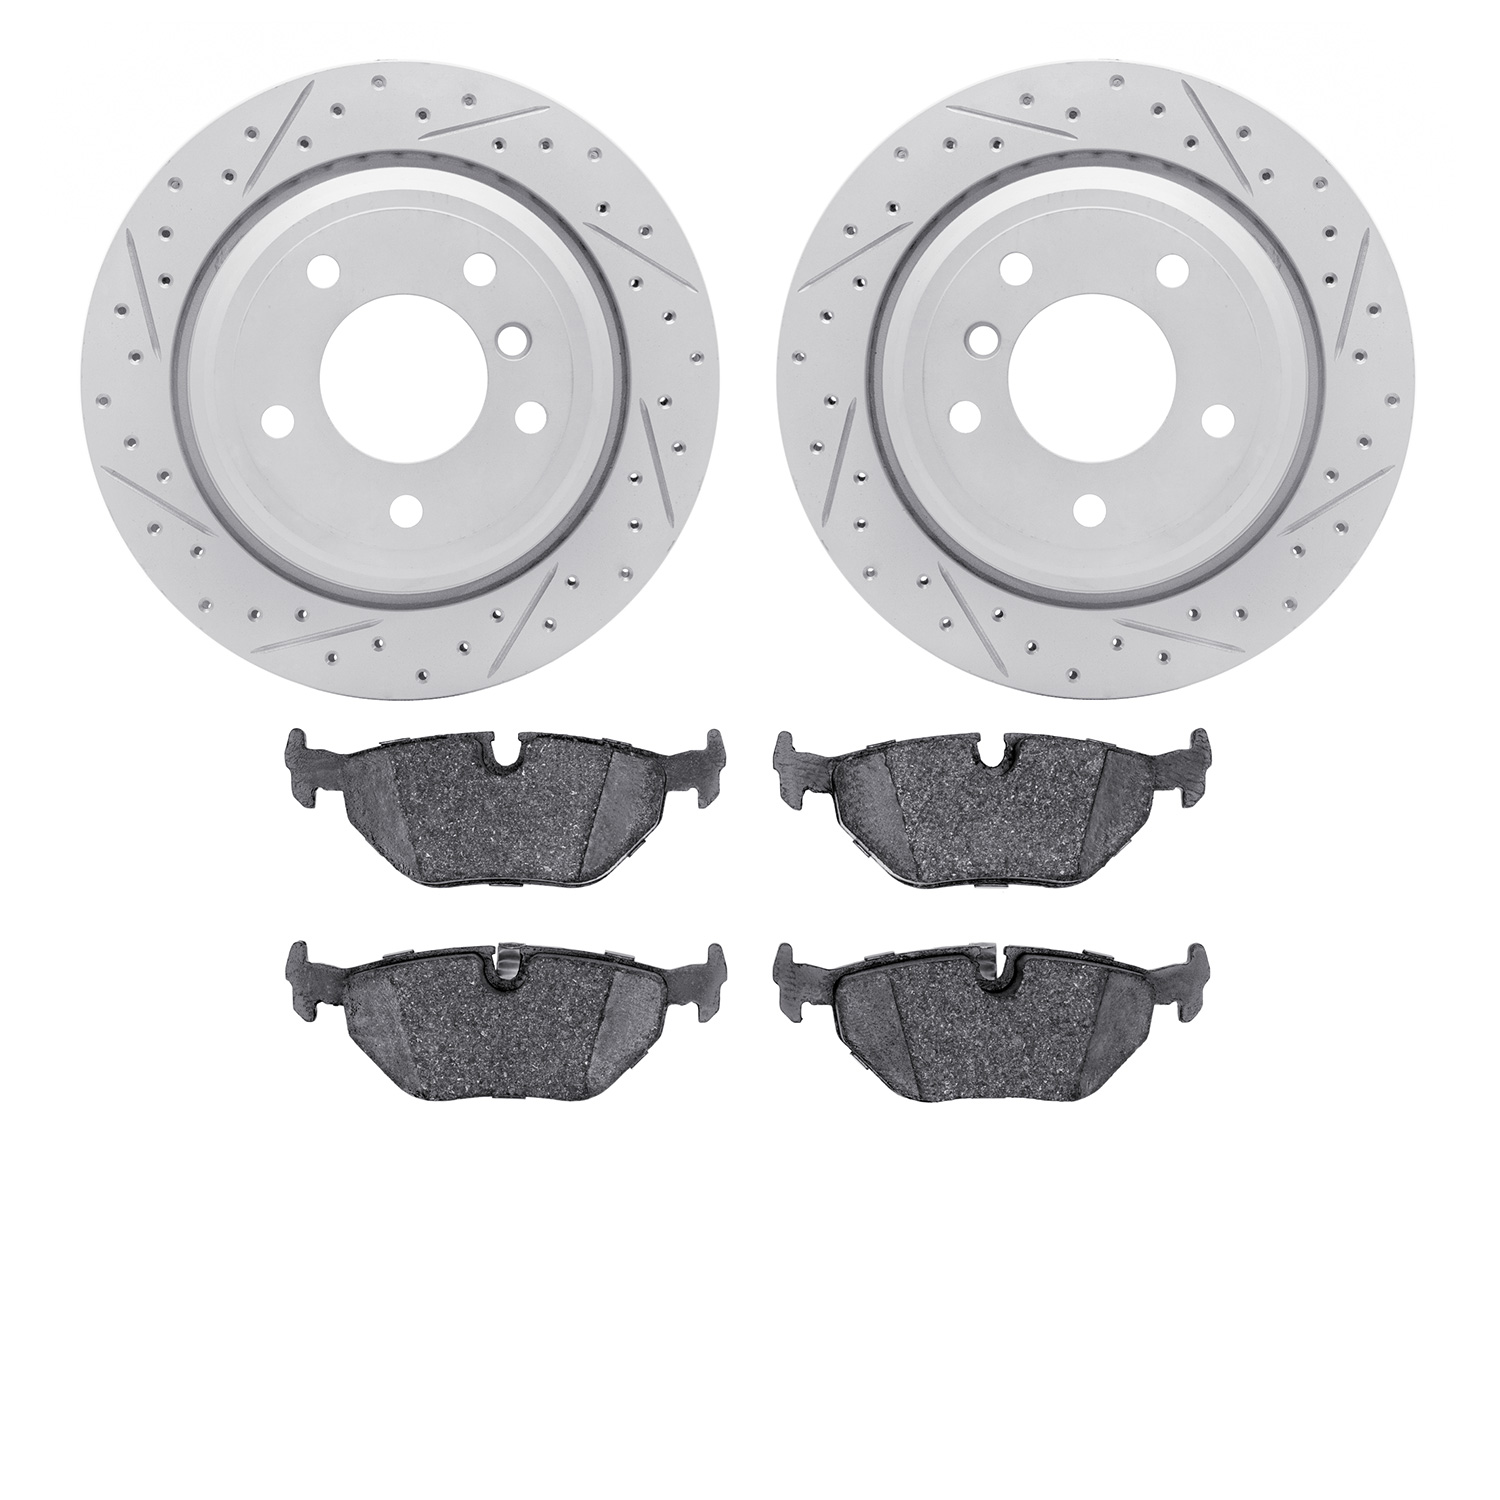 2502-31022 Geoperformance Drilled/Slotted Rotors w/5000 Advanced Brake Pads Kit, 1996-2003 BMW, Position: Rear